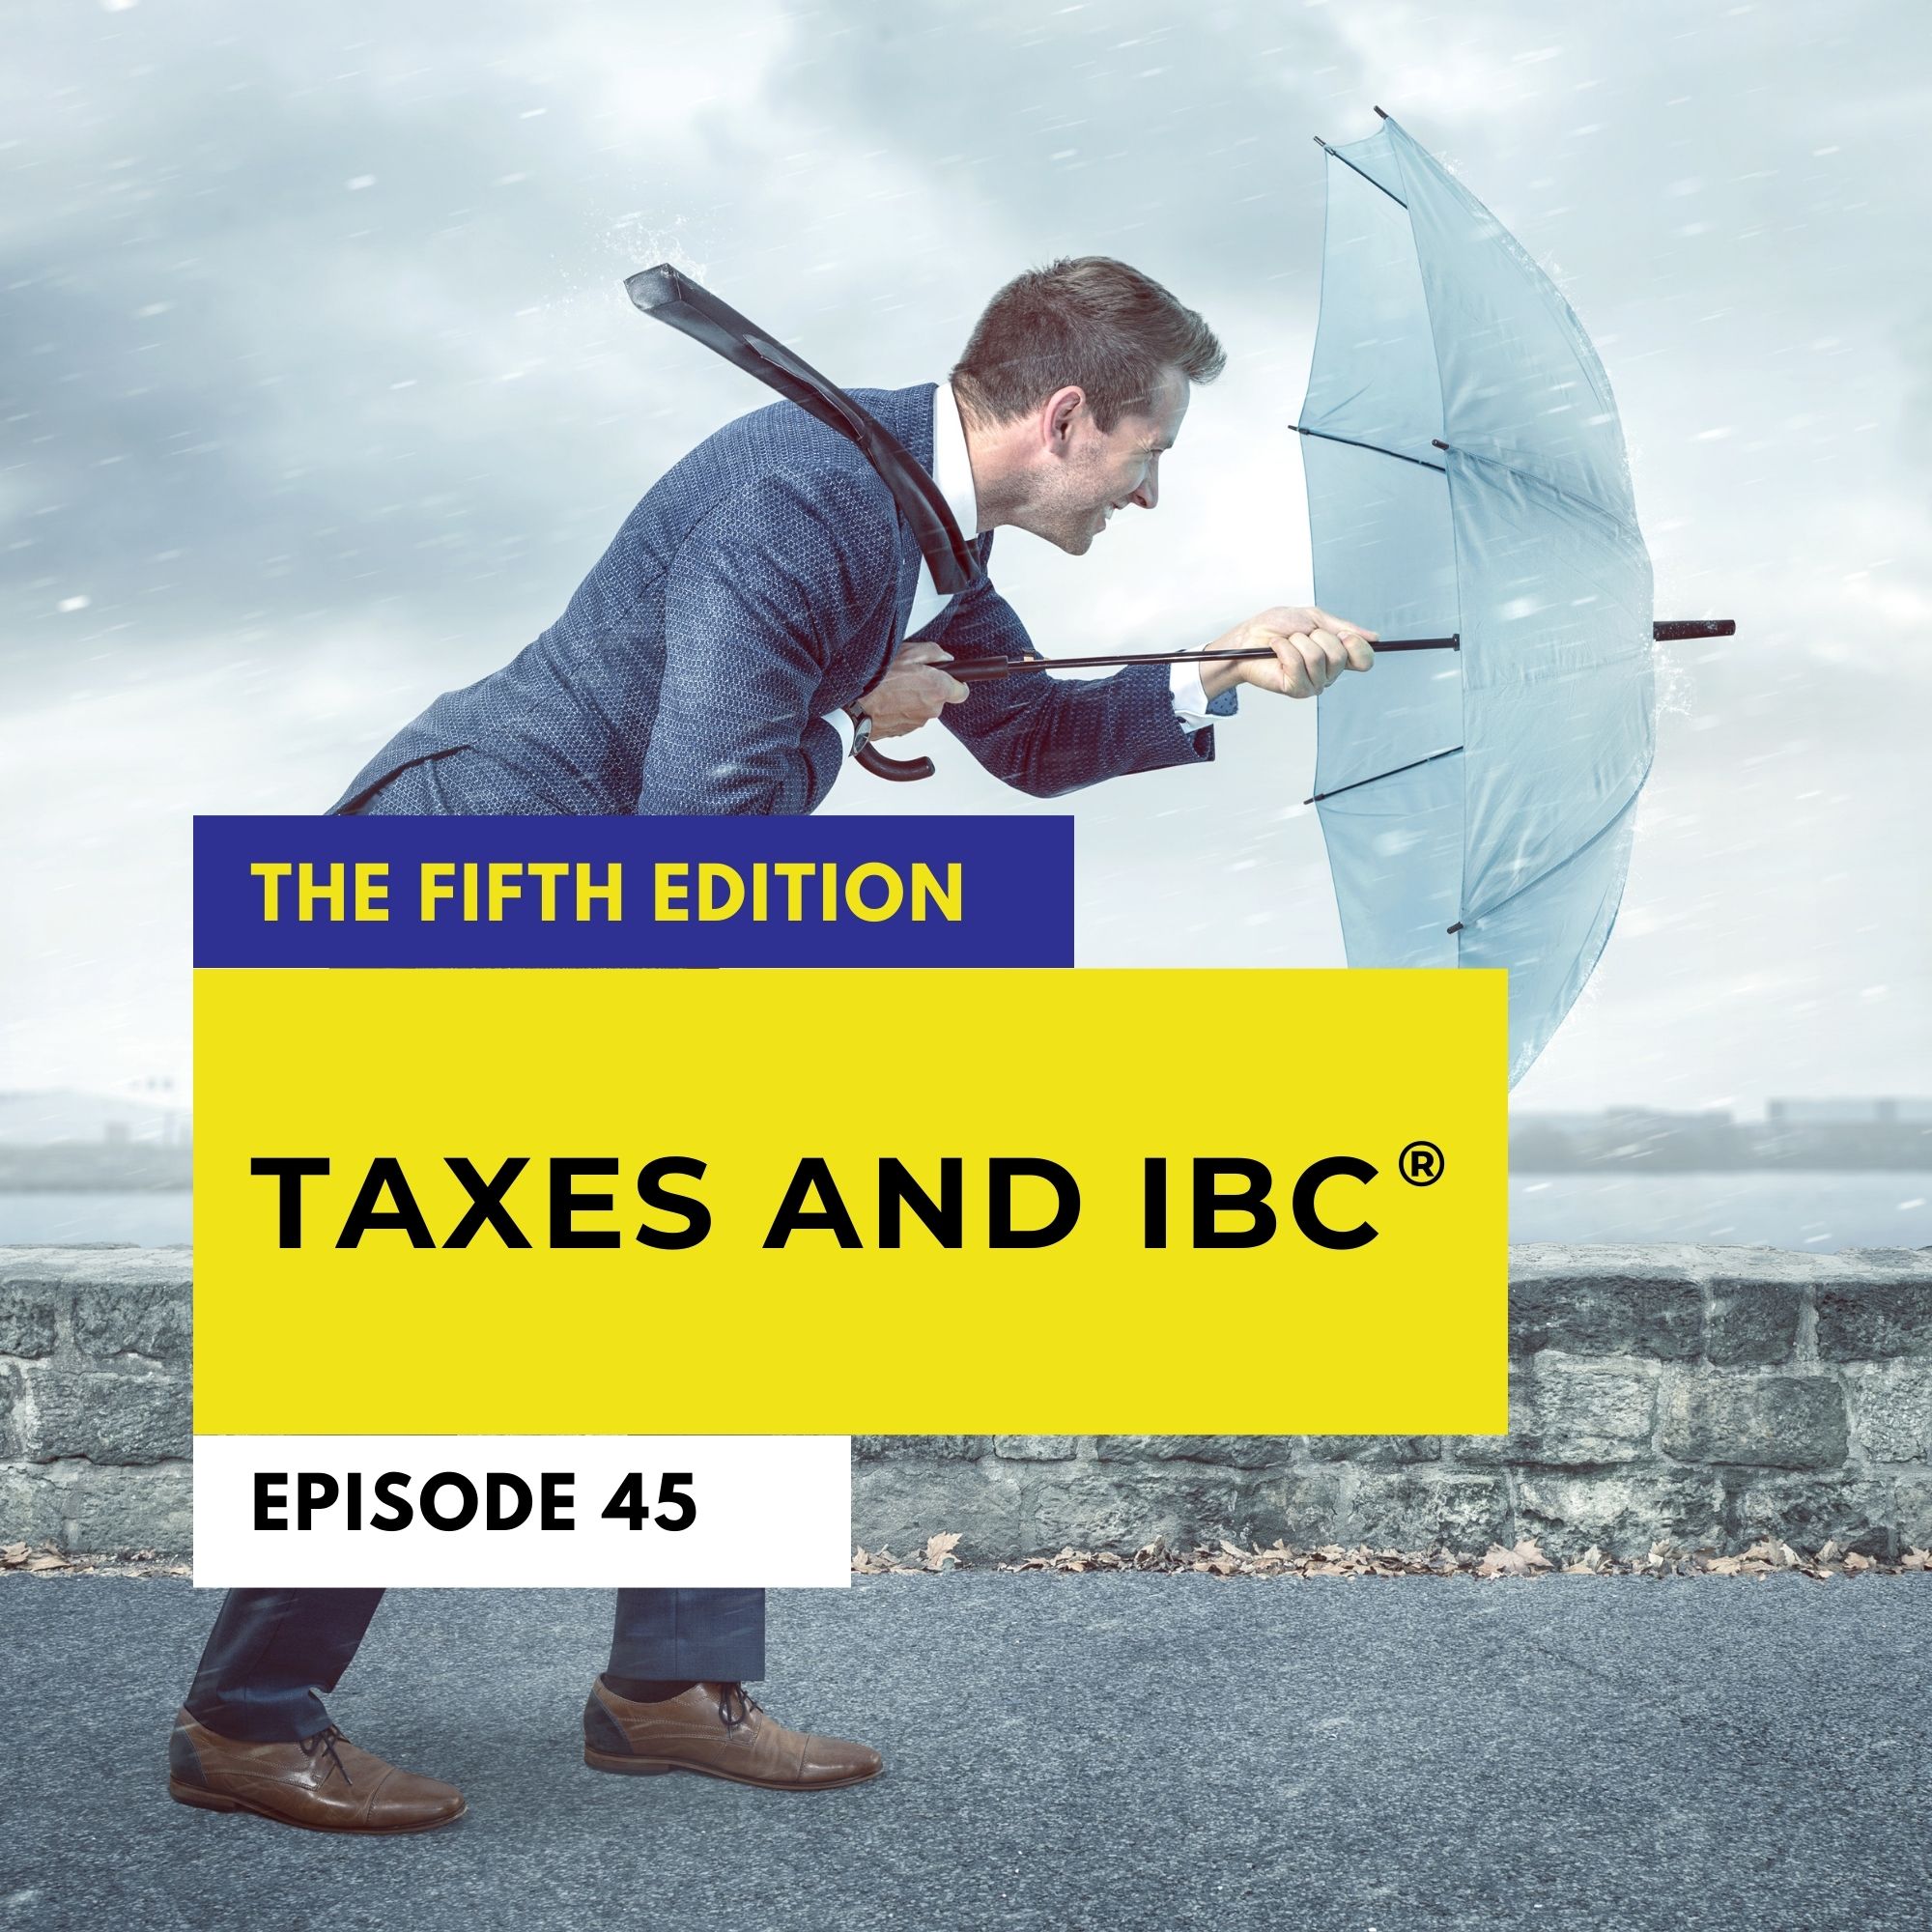 Thinking About Taxes With IBC Image